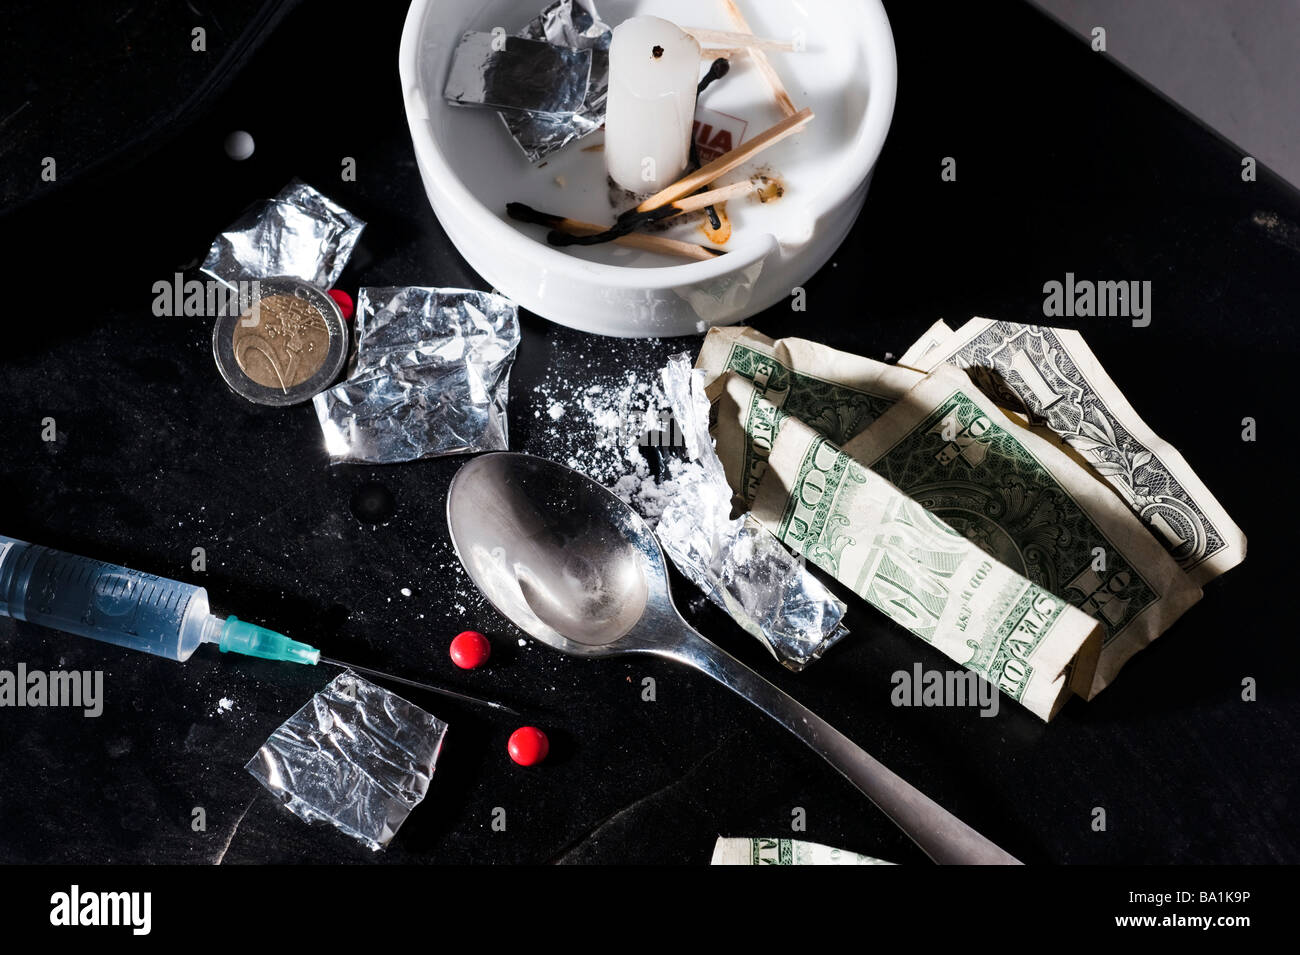 Drug abuse concept Heroin shoot up tools and drugs and money Stock Photo